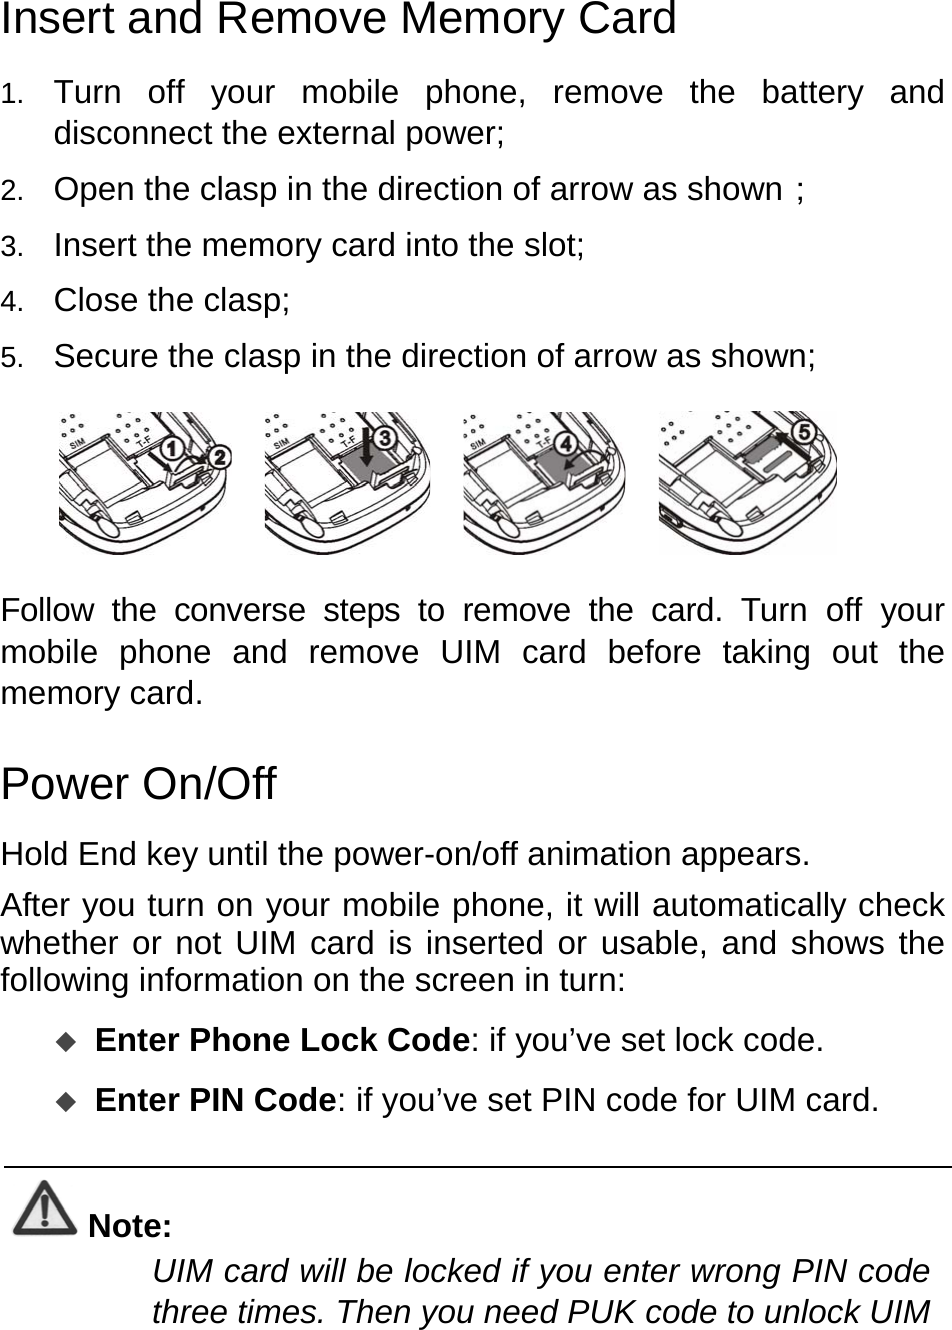   Insert and Remove Memory Card 1.  Turn off your mobile phone, remove the battery and disconnect the external power; 2.  Open the clasp in the direction of arrow as shown； 3.  Insert the memory card into the slot; 4.  Close the clasp; 5.  Secure the clasp in the direction of arrow as shown;           Follow the converse steps to remove the card. Turn off your mobile phone and remove UIM card before taking out the memory card.   Power On/Off Hold End key until the power-on/off animation appears. After you turn on your mobile phone, it will automatically check whether or not UIM card is inserted or usable, and shows the following information on the screen in turn:  Enter Phone Lock Code: if you’ve set lock code.  Enter PIN Code: if you’ve set PIN code for UIM card.  Note: UIM card will be locked if you enter wrong PIN code three times. Then you need PUK code to unlock UIM 